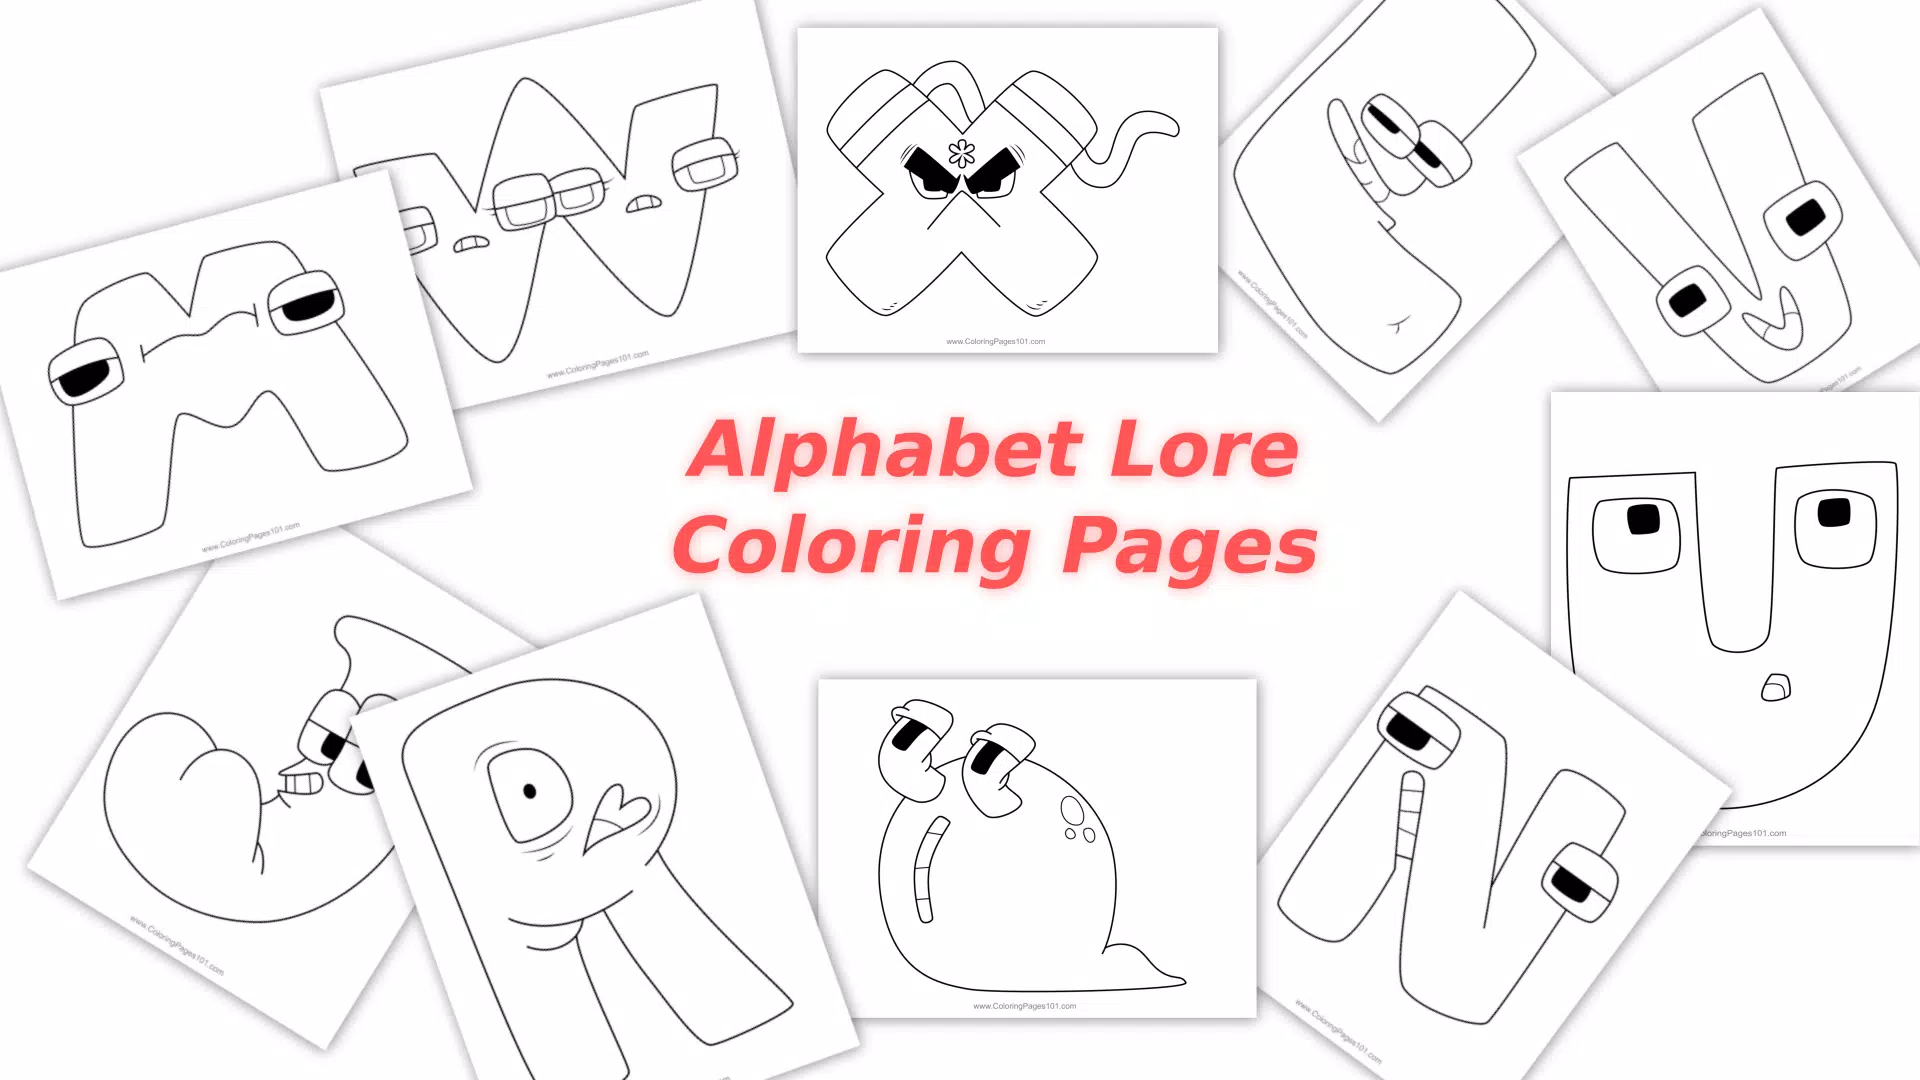 Alphabet lore : coloring page for Android - Download